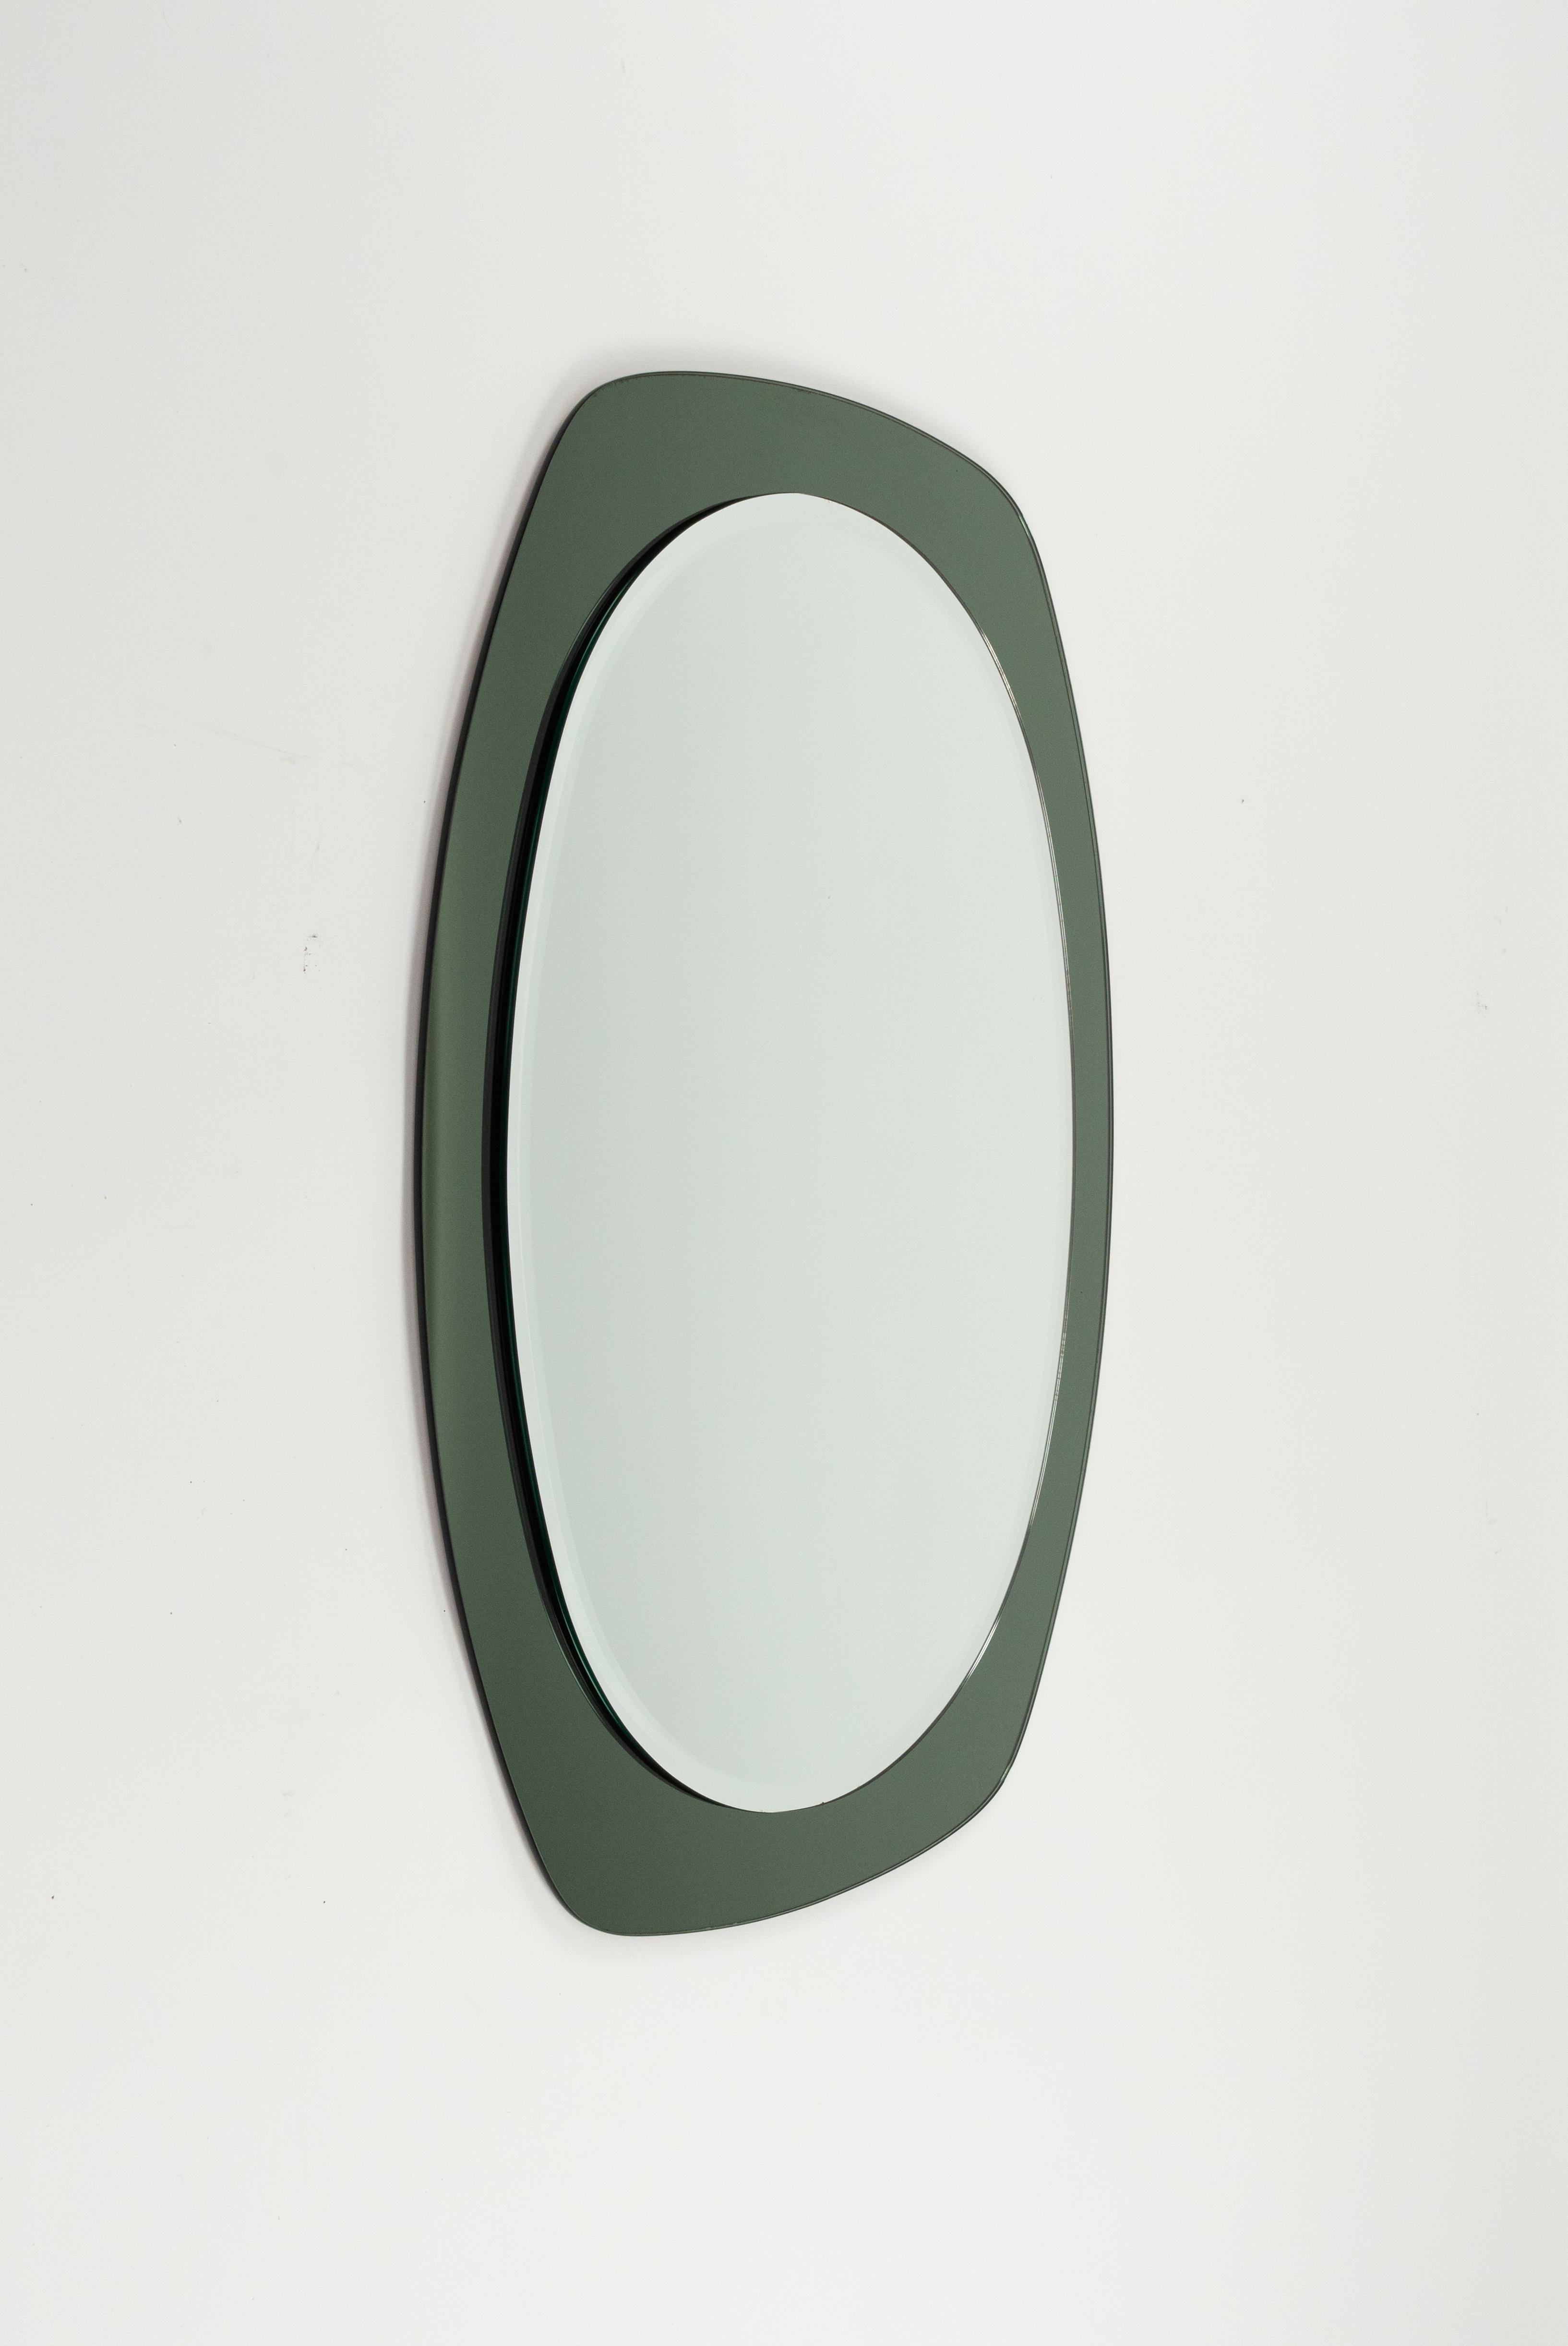 Midcentury Cristal Art Oval Wall Mirror with Green Frame, Italy 1960s For Sale 2